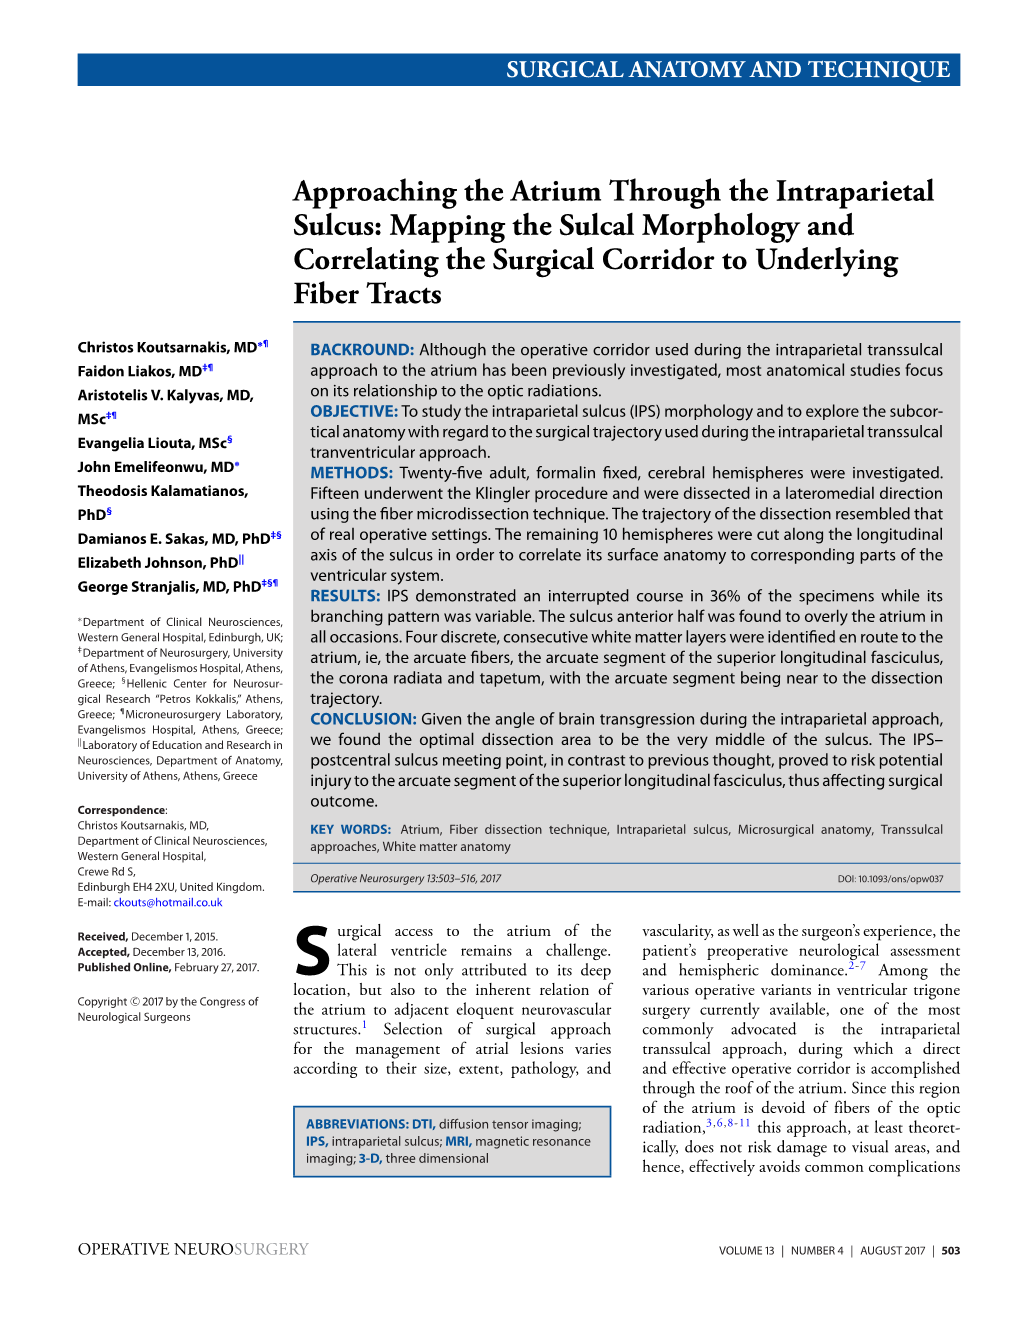 Approaching the Atrium Through the Intraparietal Sulcus: Mapping the Sulcal Morphology and Correlating the Surgical Corridor to Underlying Fiber Tracts